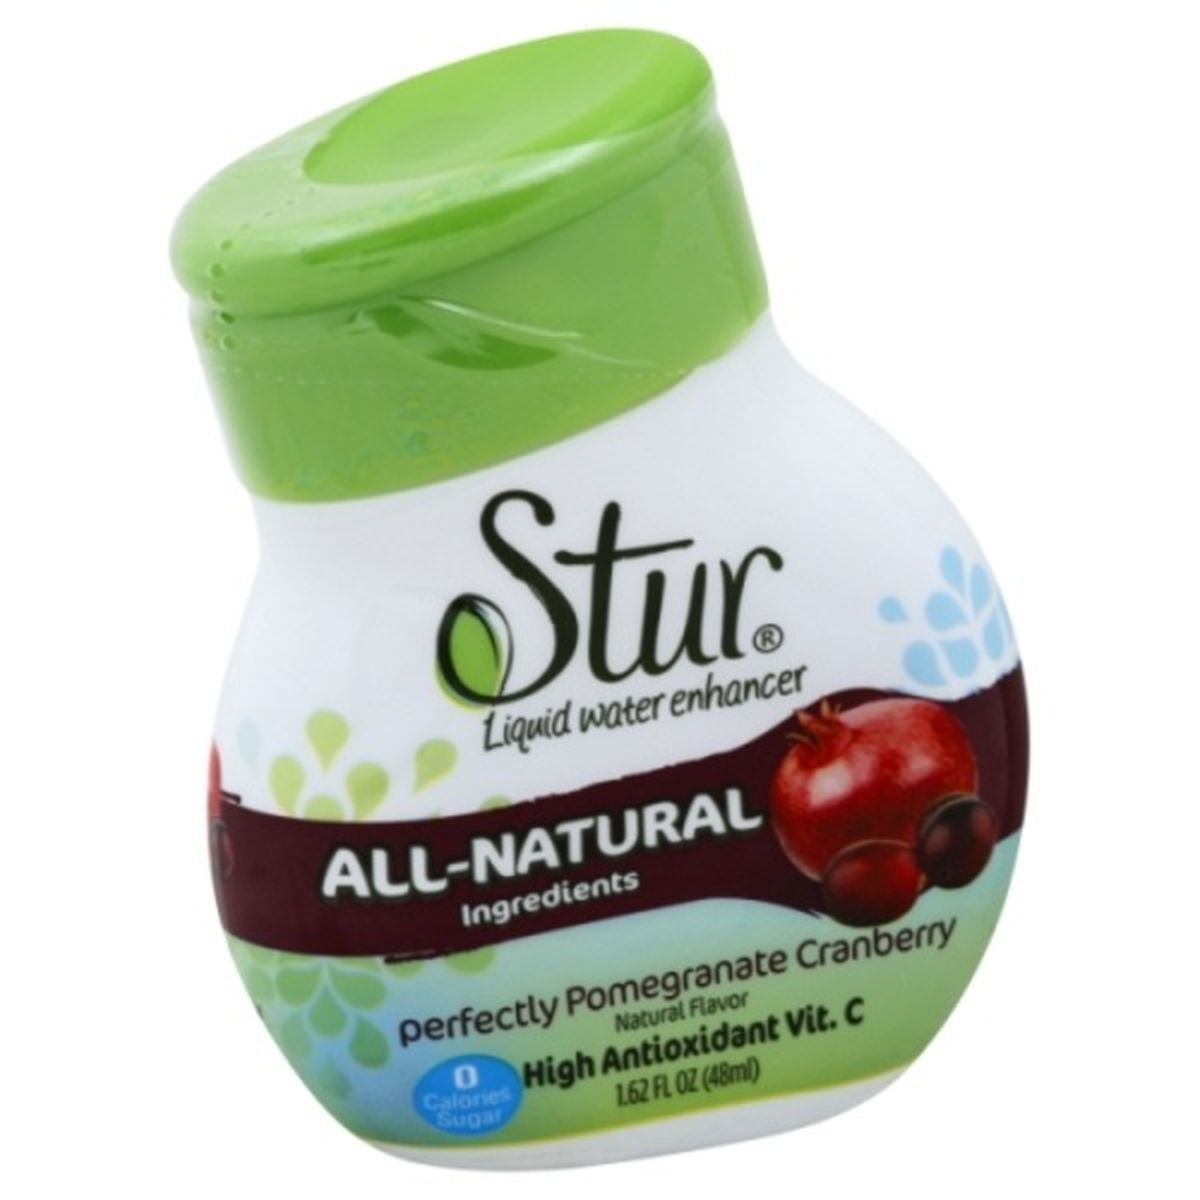 Calories in Stur Liquid Water Enhancer, Perfectly Pomegranate Cranberry